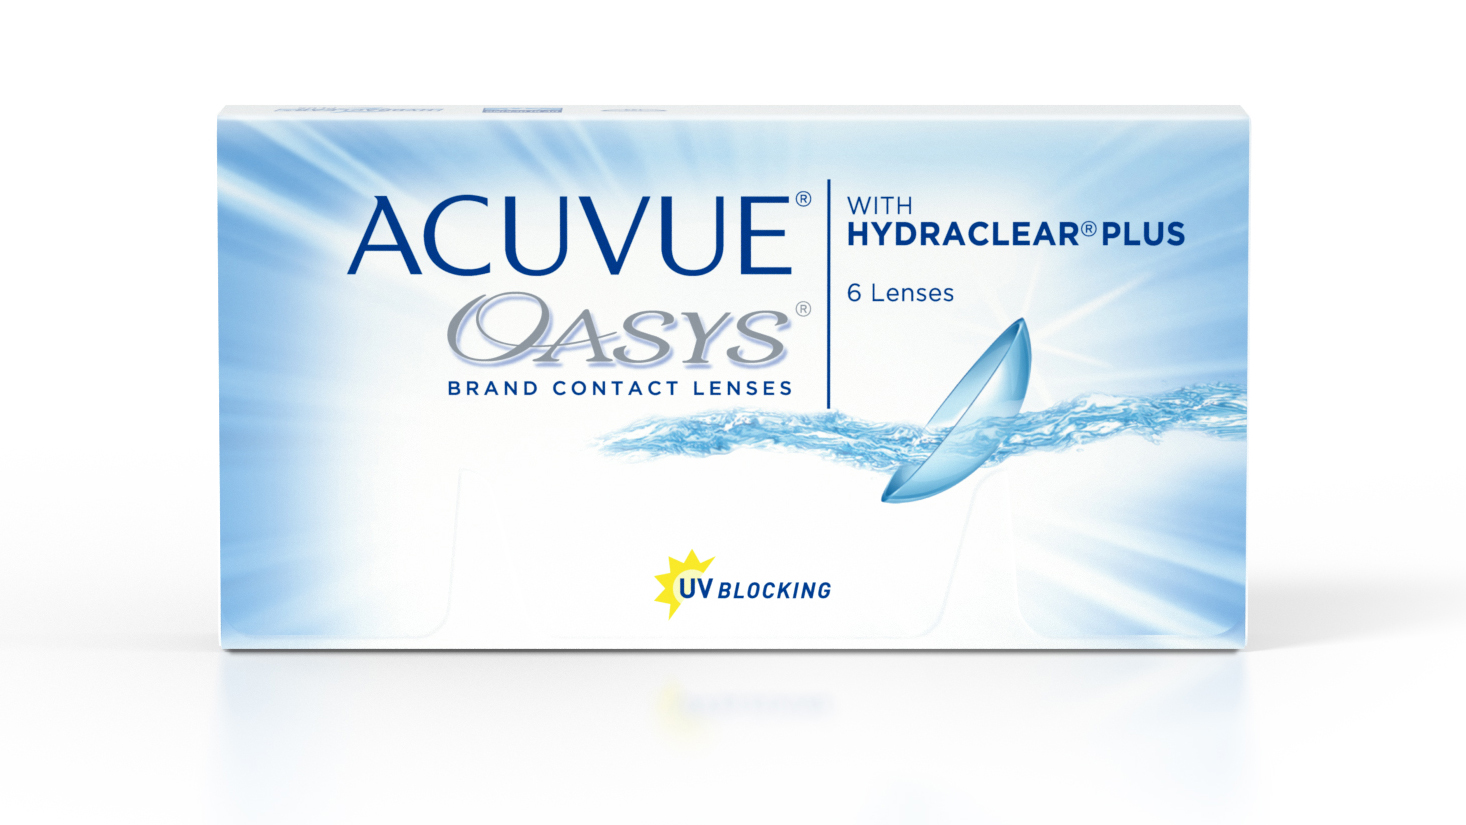 ACUVUE OASYS 2-WEEK with HYDRACLEAR PLUS